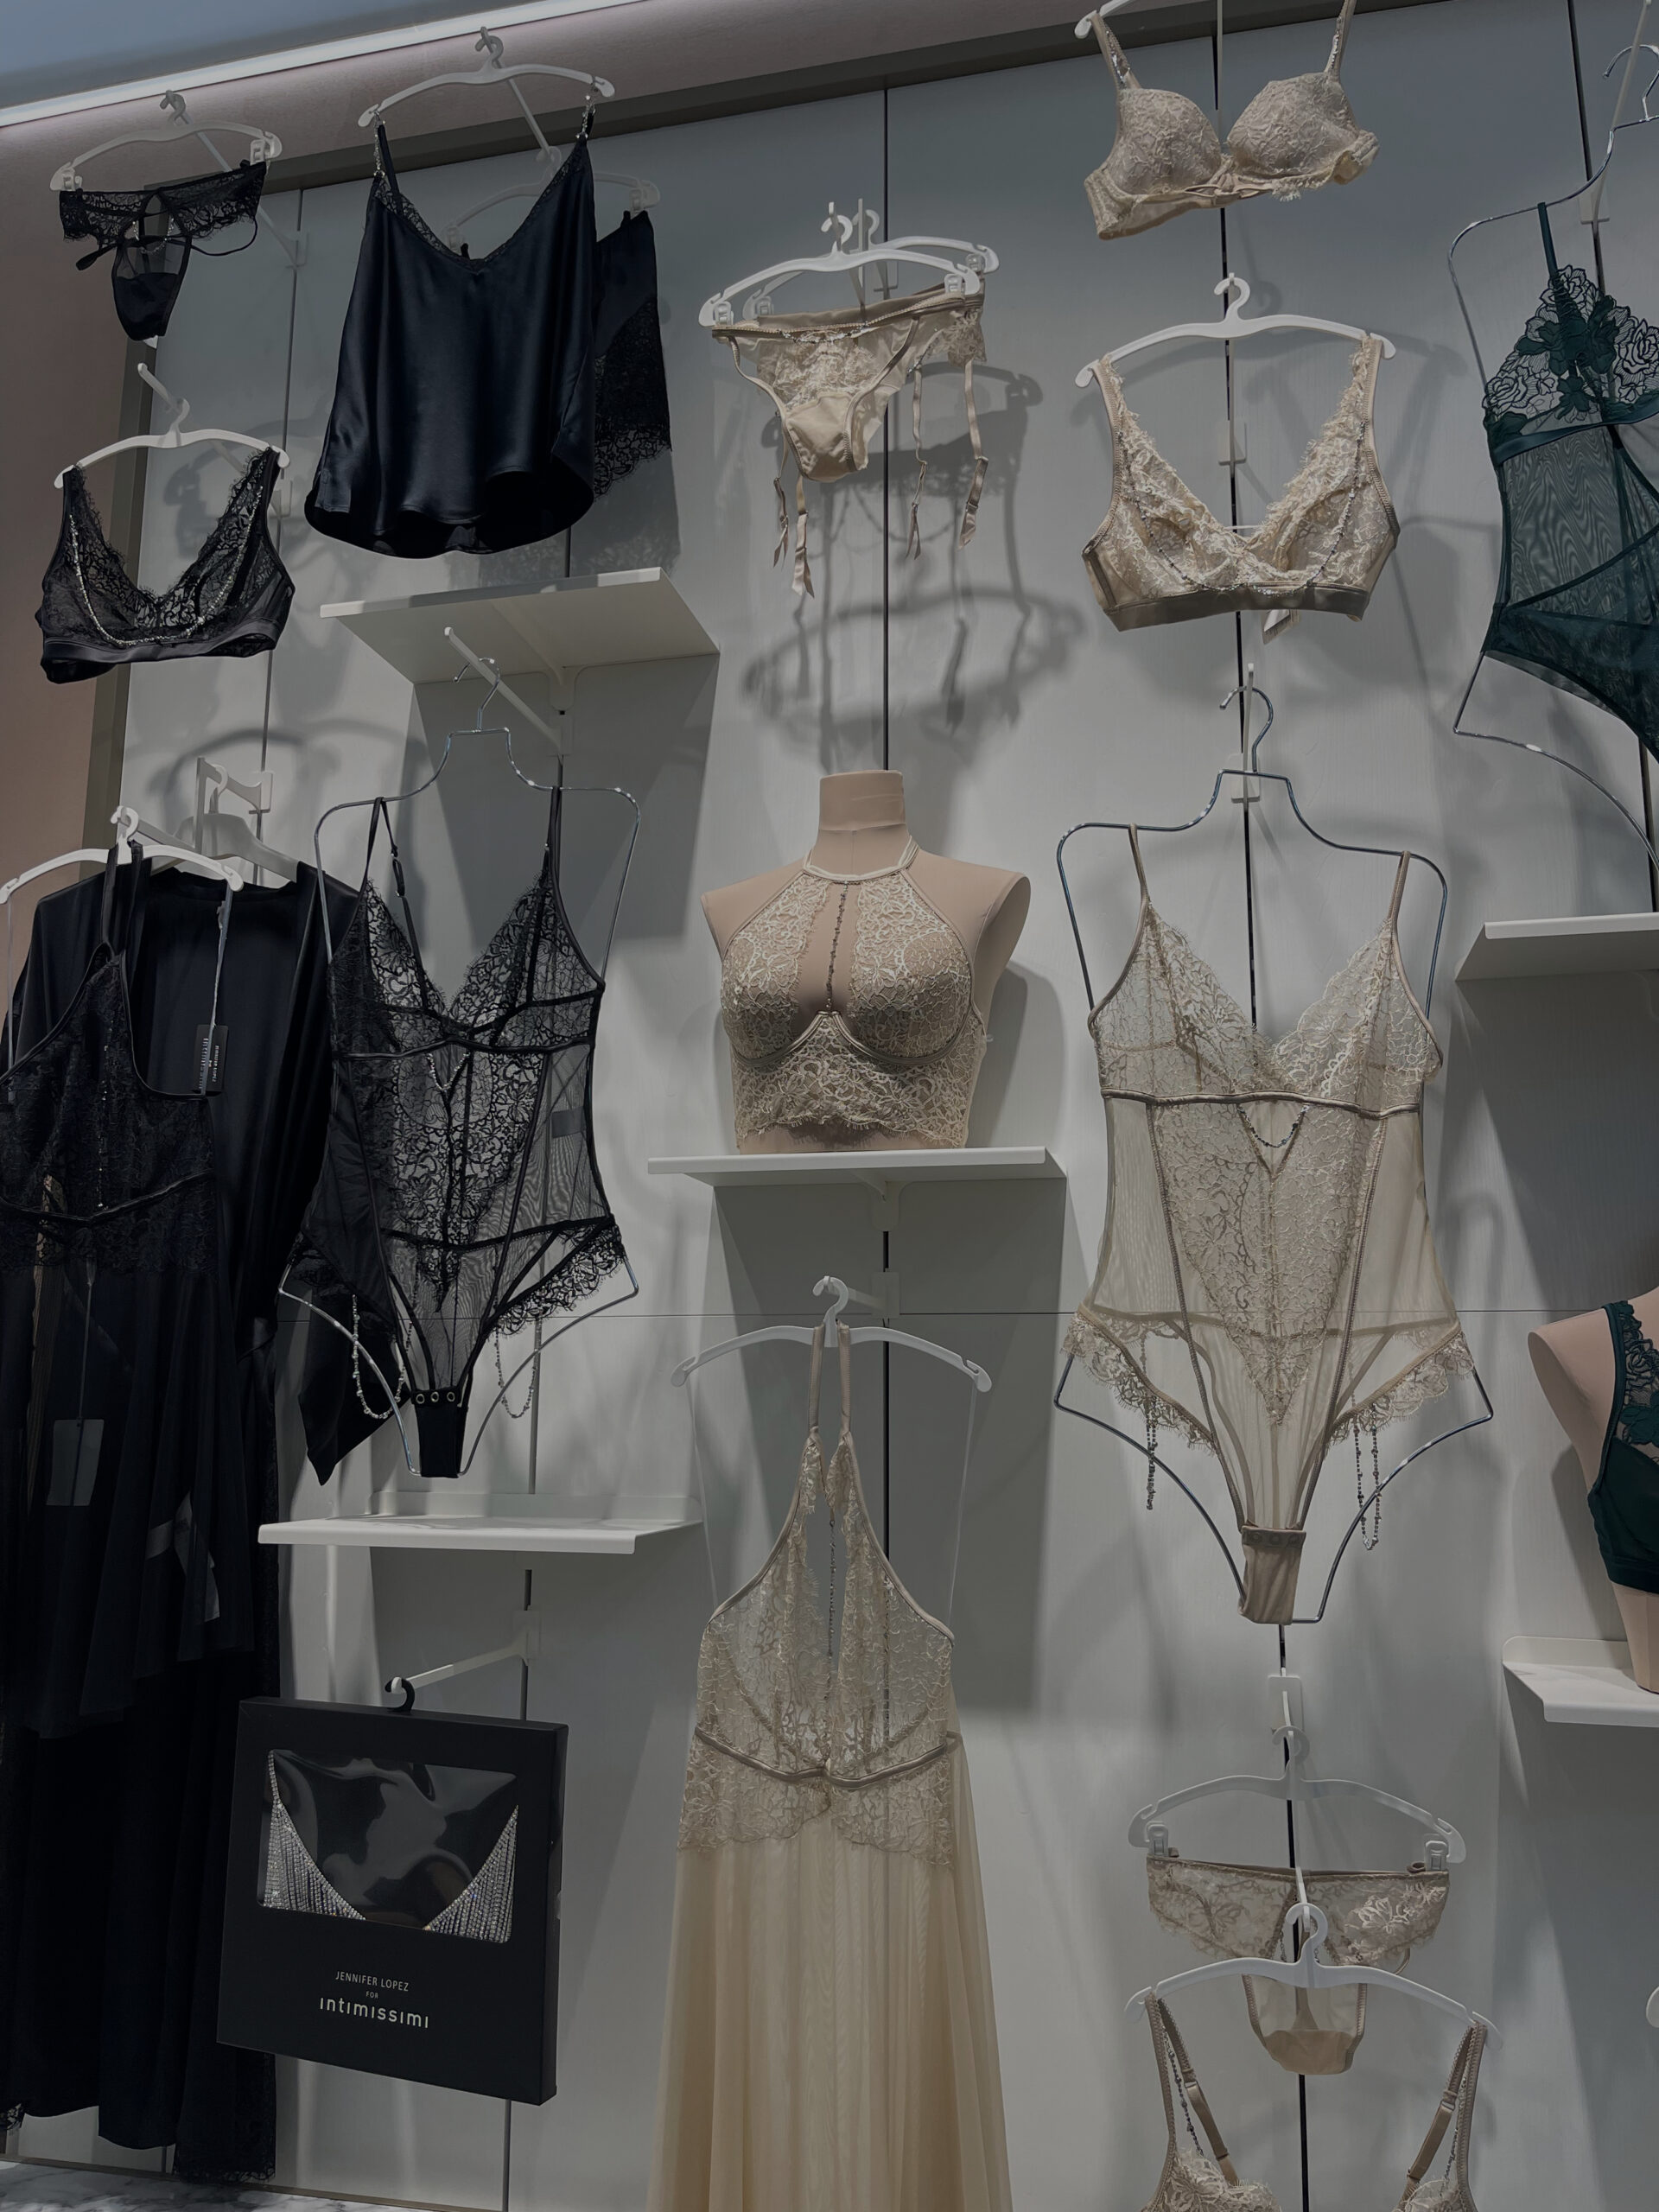 Intimissimi's basic collection. Never be without!